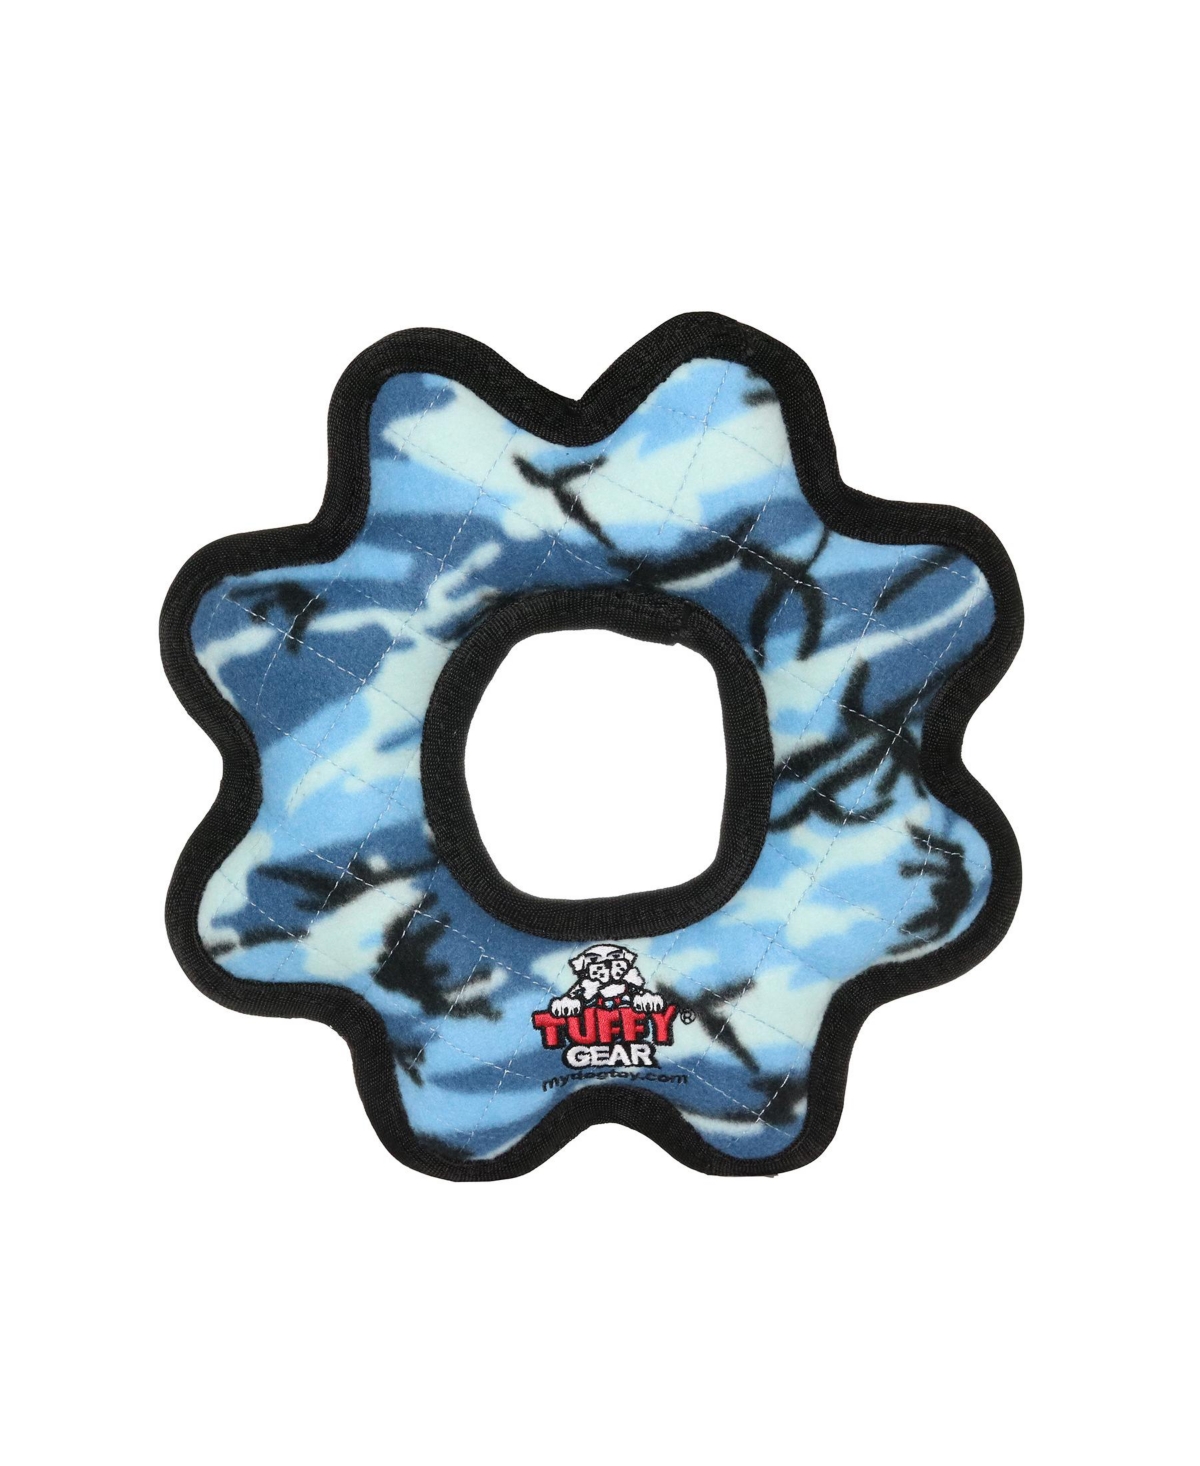 Ultimate Gear Ring Camo Blue, Dog Toy - Blue